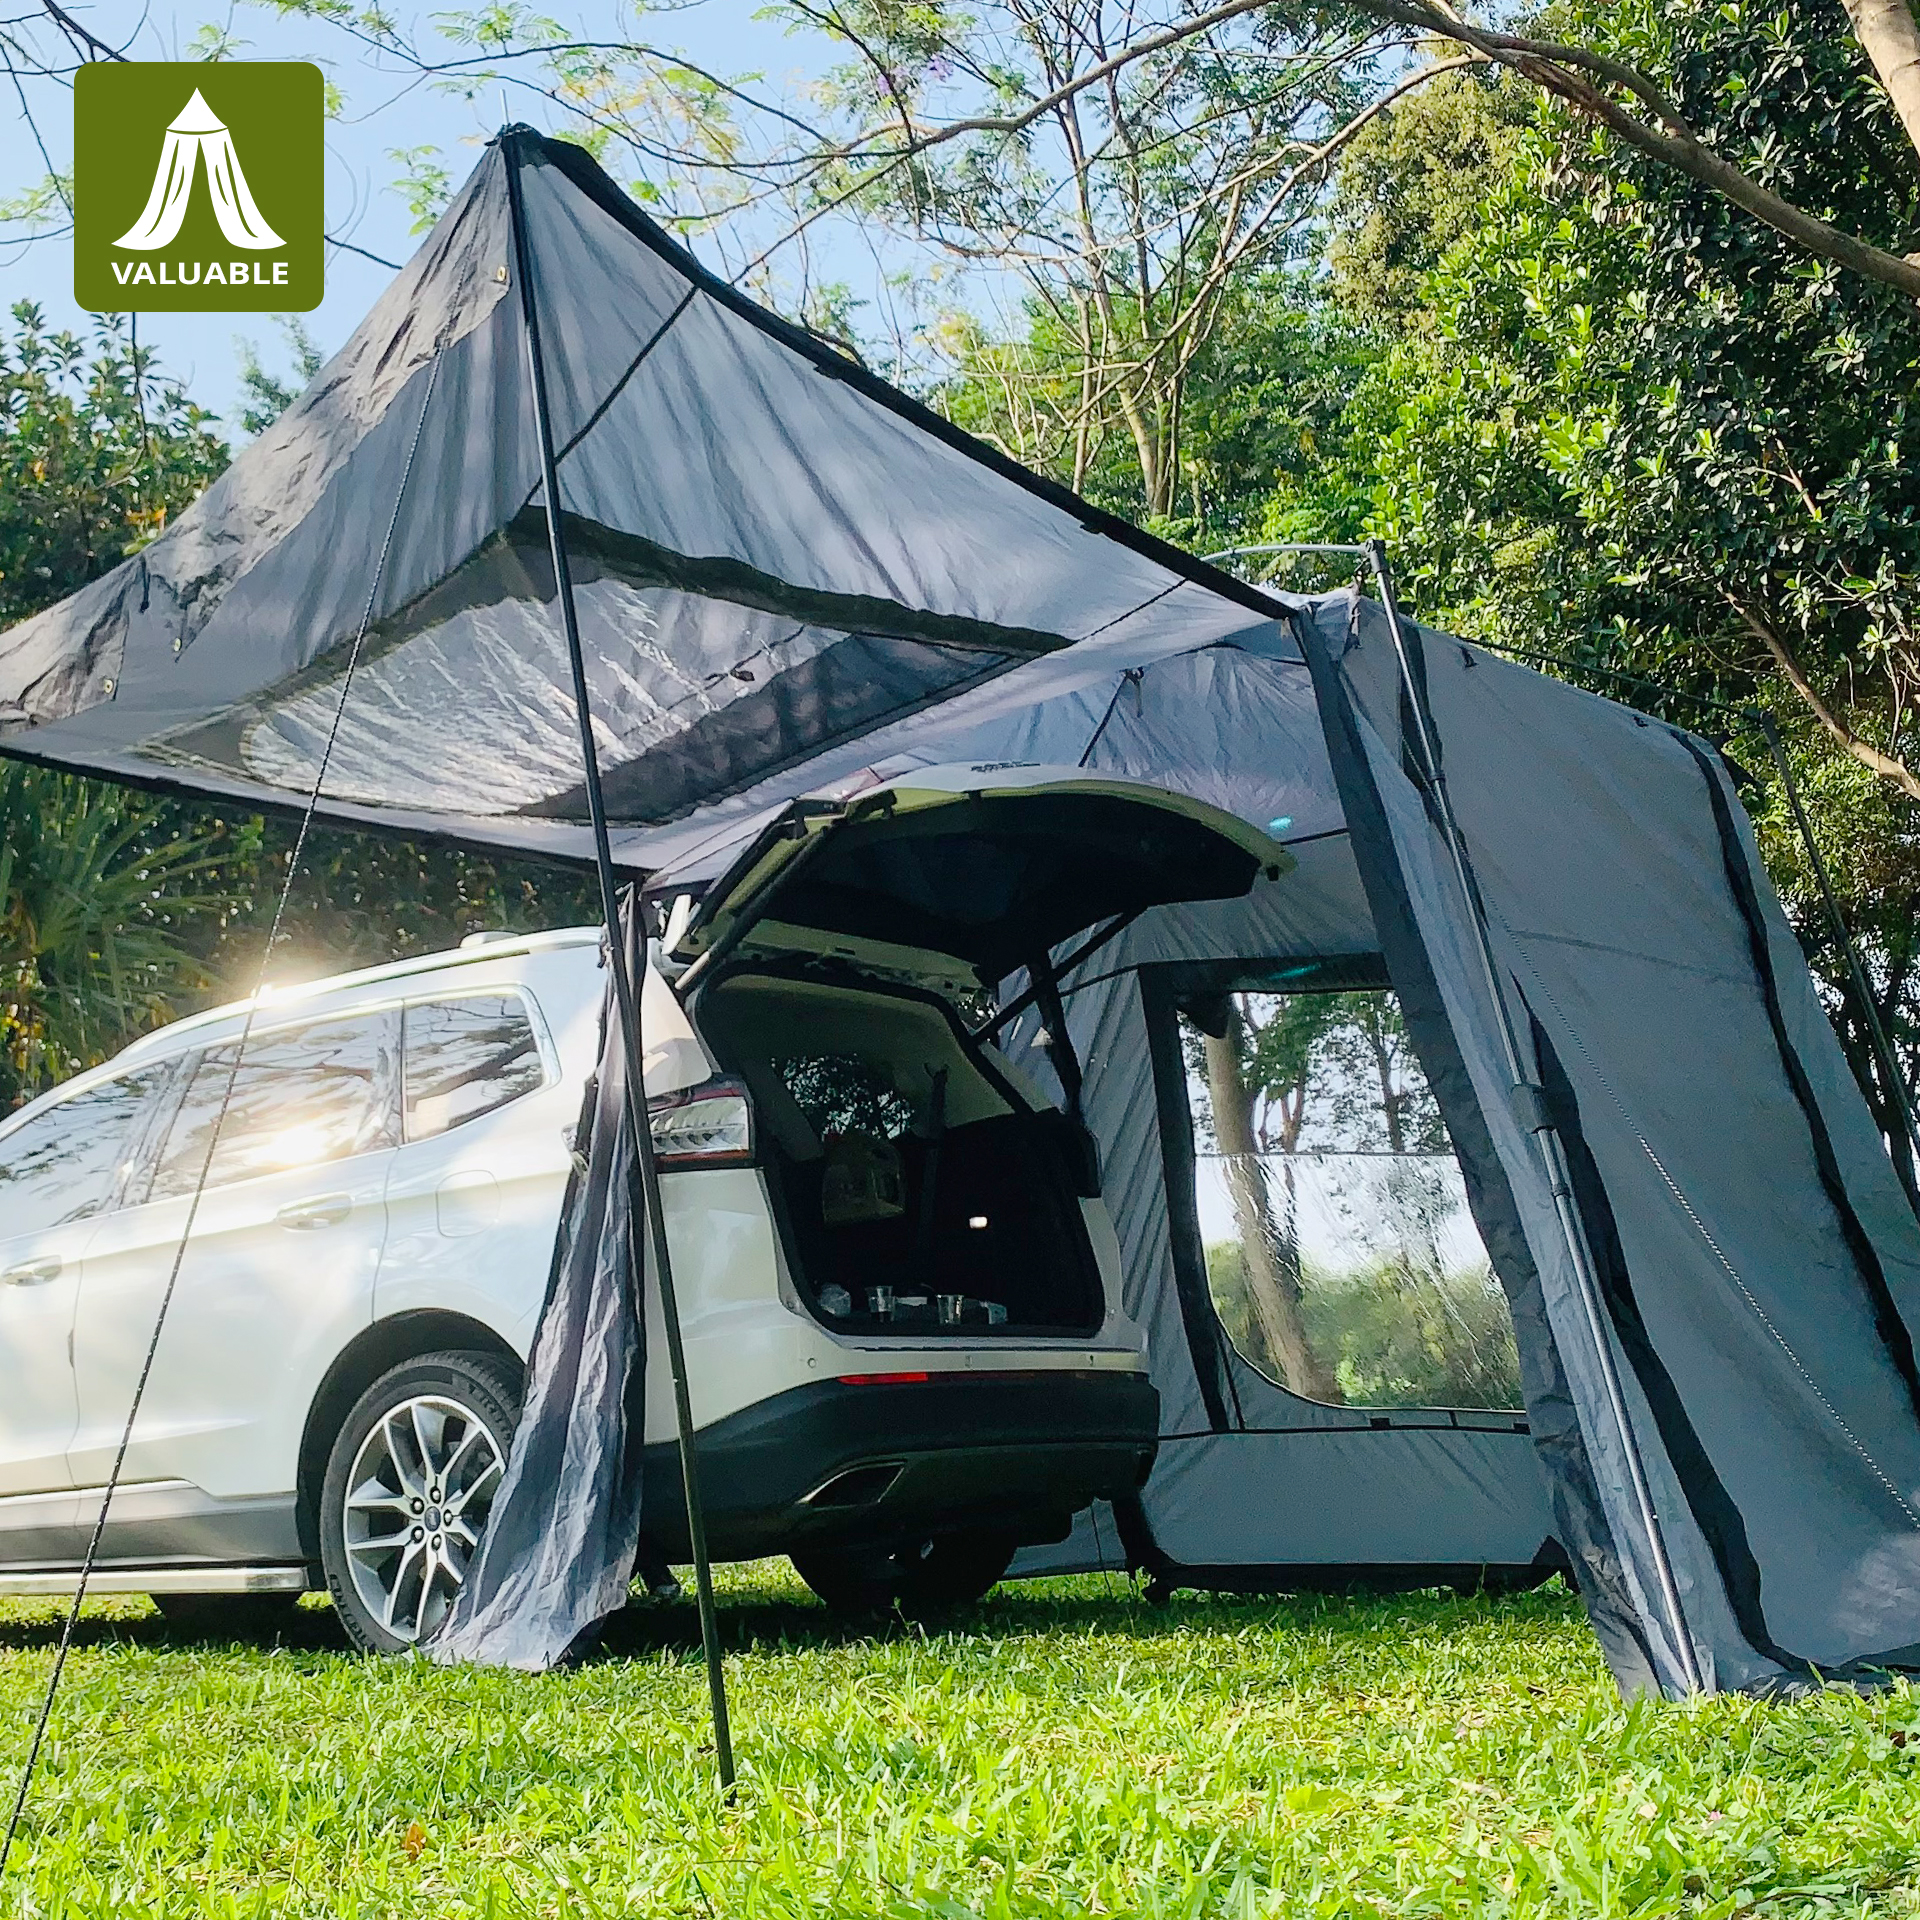 Car Rear Awning Car Rear Extension Outdoor Automatic Bracket Camper Car Rear Tent Car Awning Mosquito Net Sun Protection Against Rain